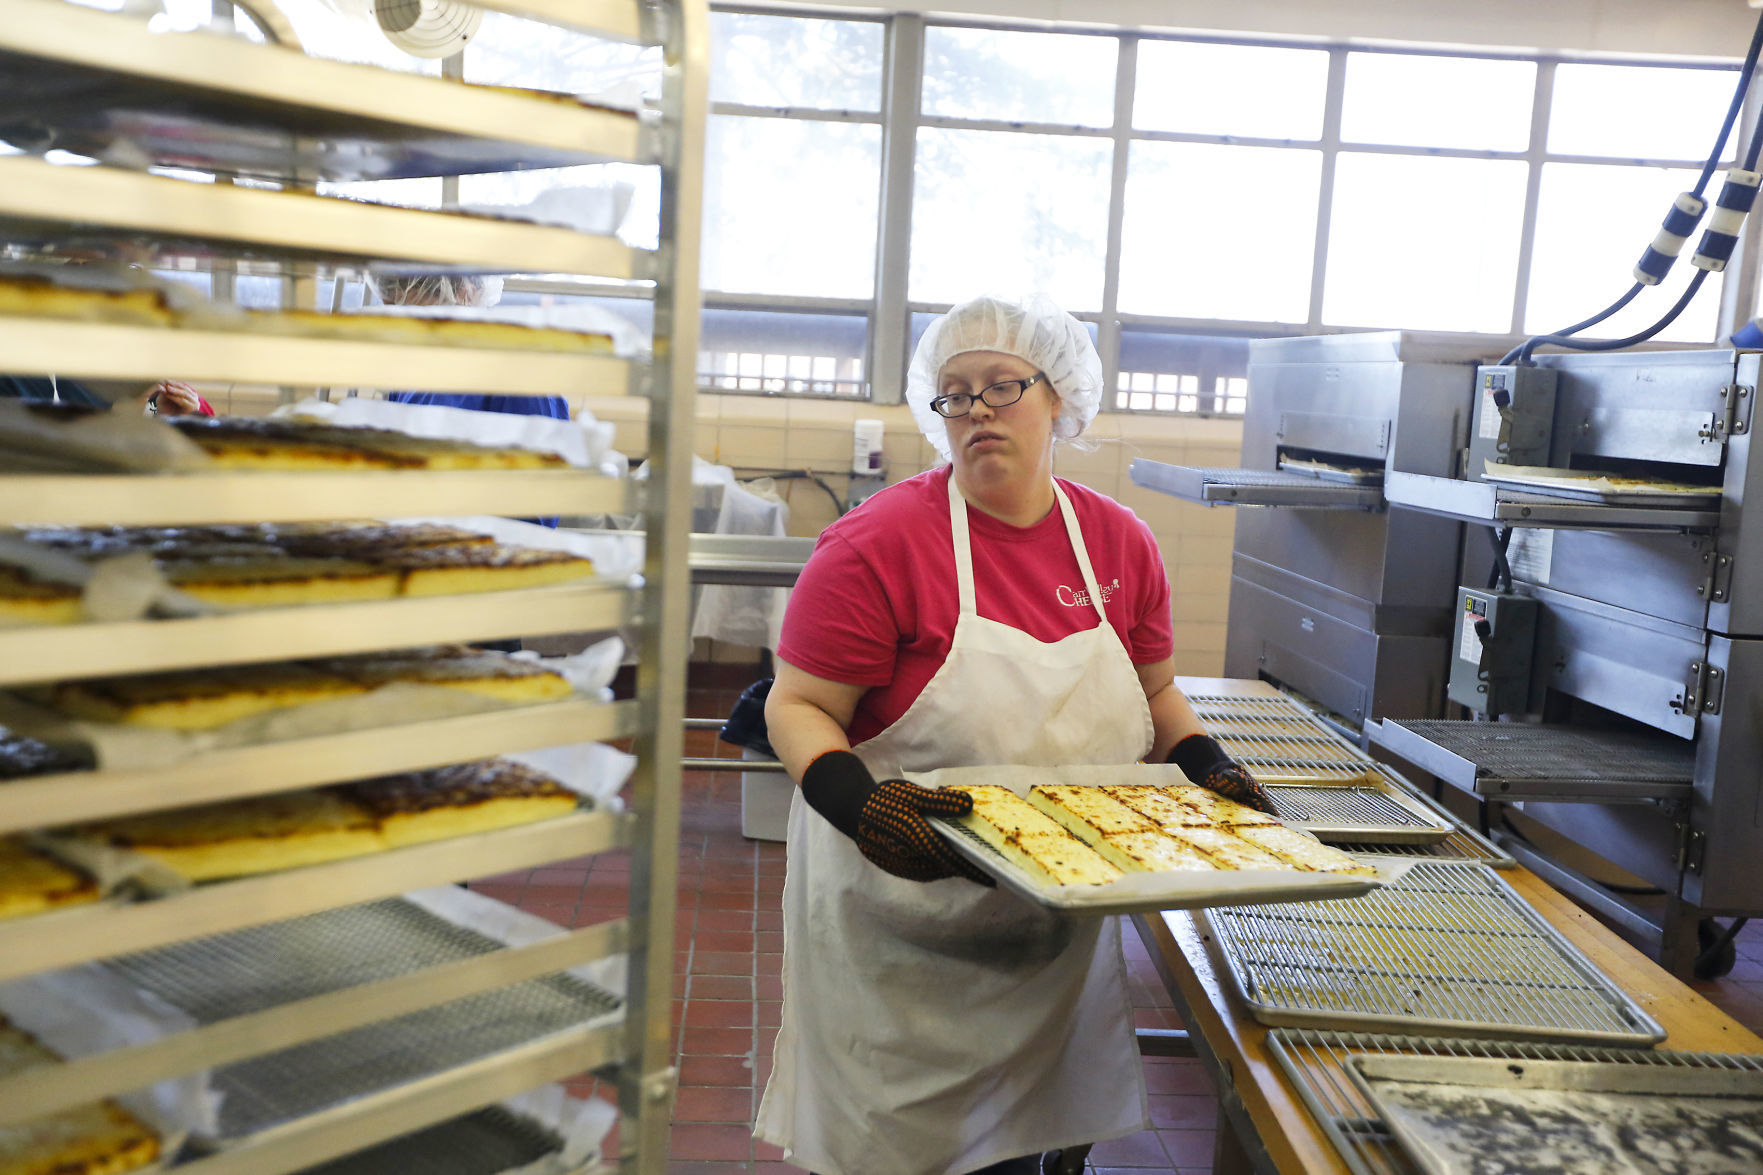 Alyssa Campbell, of Fennimore, Wis., takes bread cheese out of the oven at Carr Valley Cheese Company in Fennimore on Thursday, Mar. 22, 2018.    PHOTO CREDIT: EILEEN MESLAR